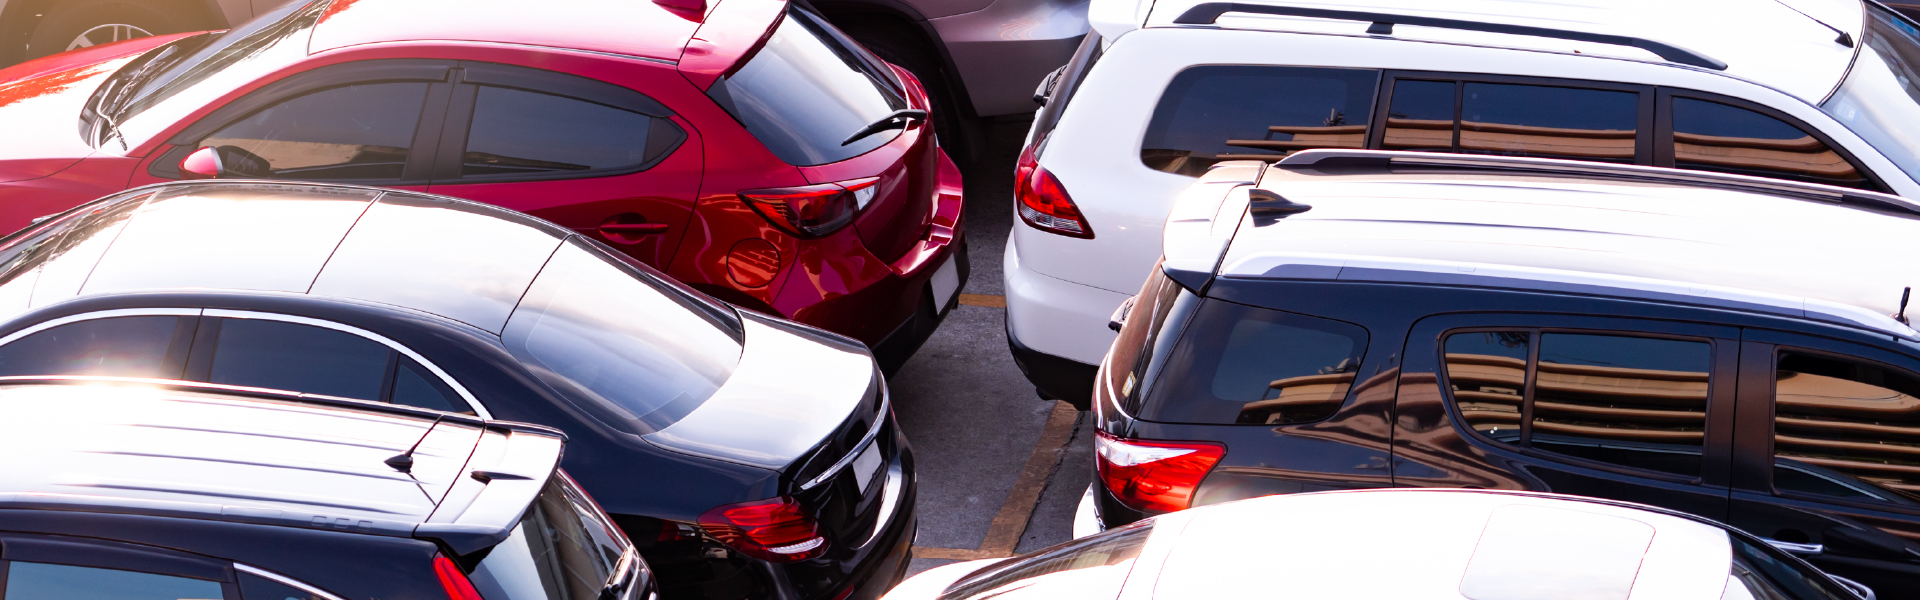 Should You Be Buying a New Car or a Used Car?